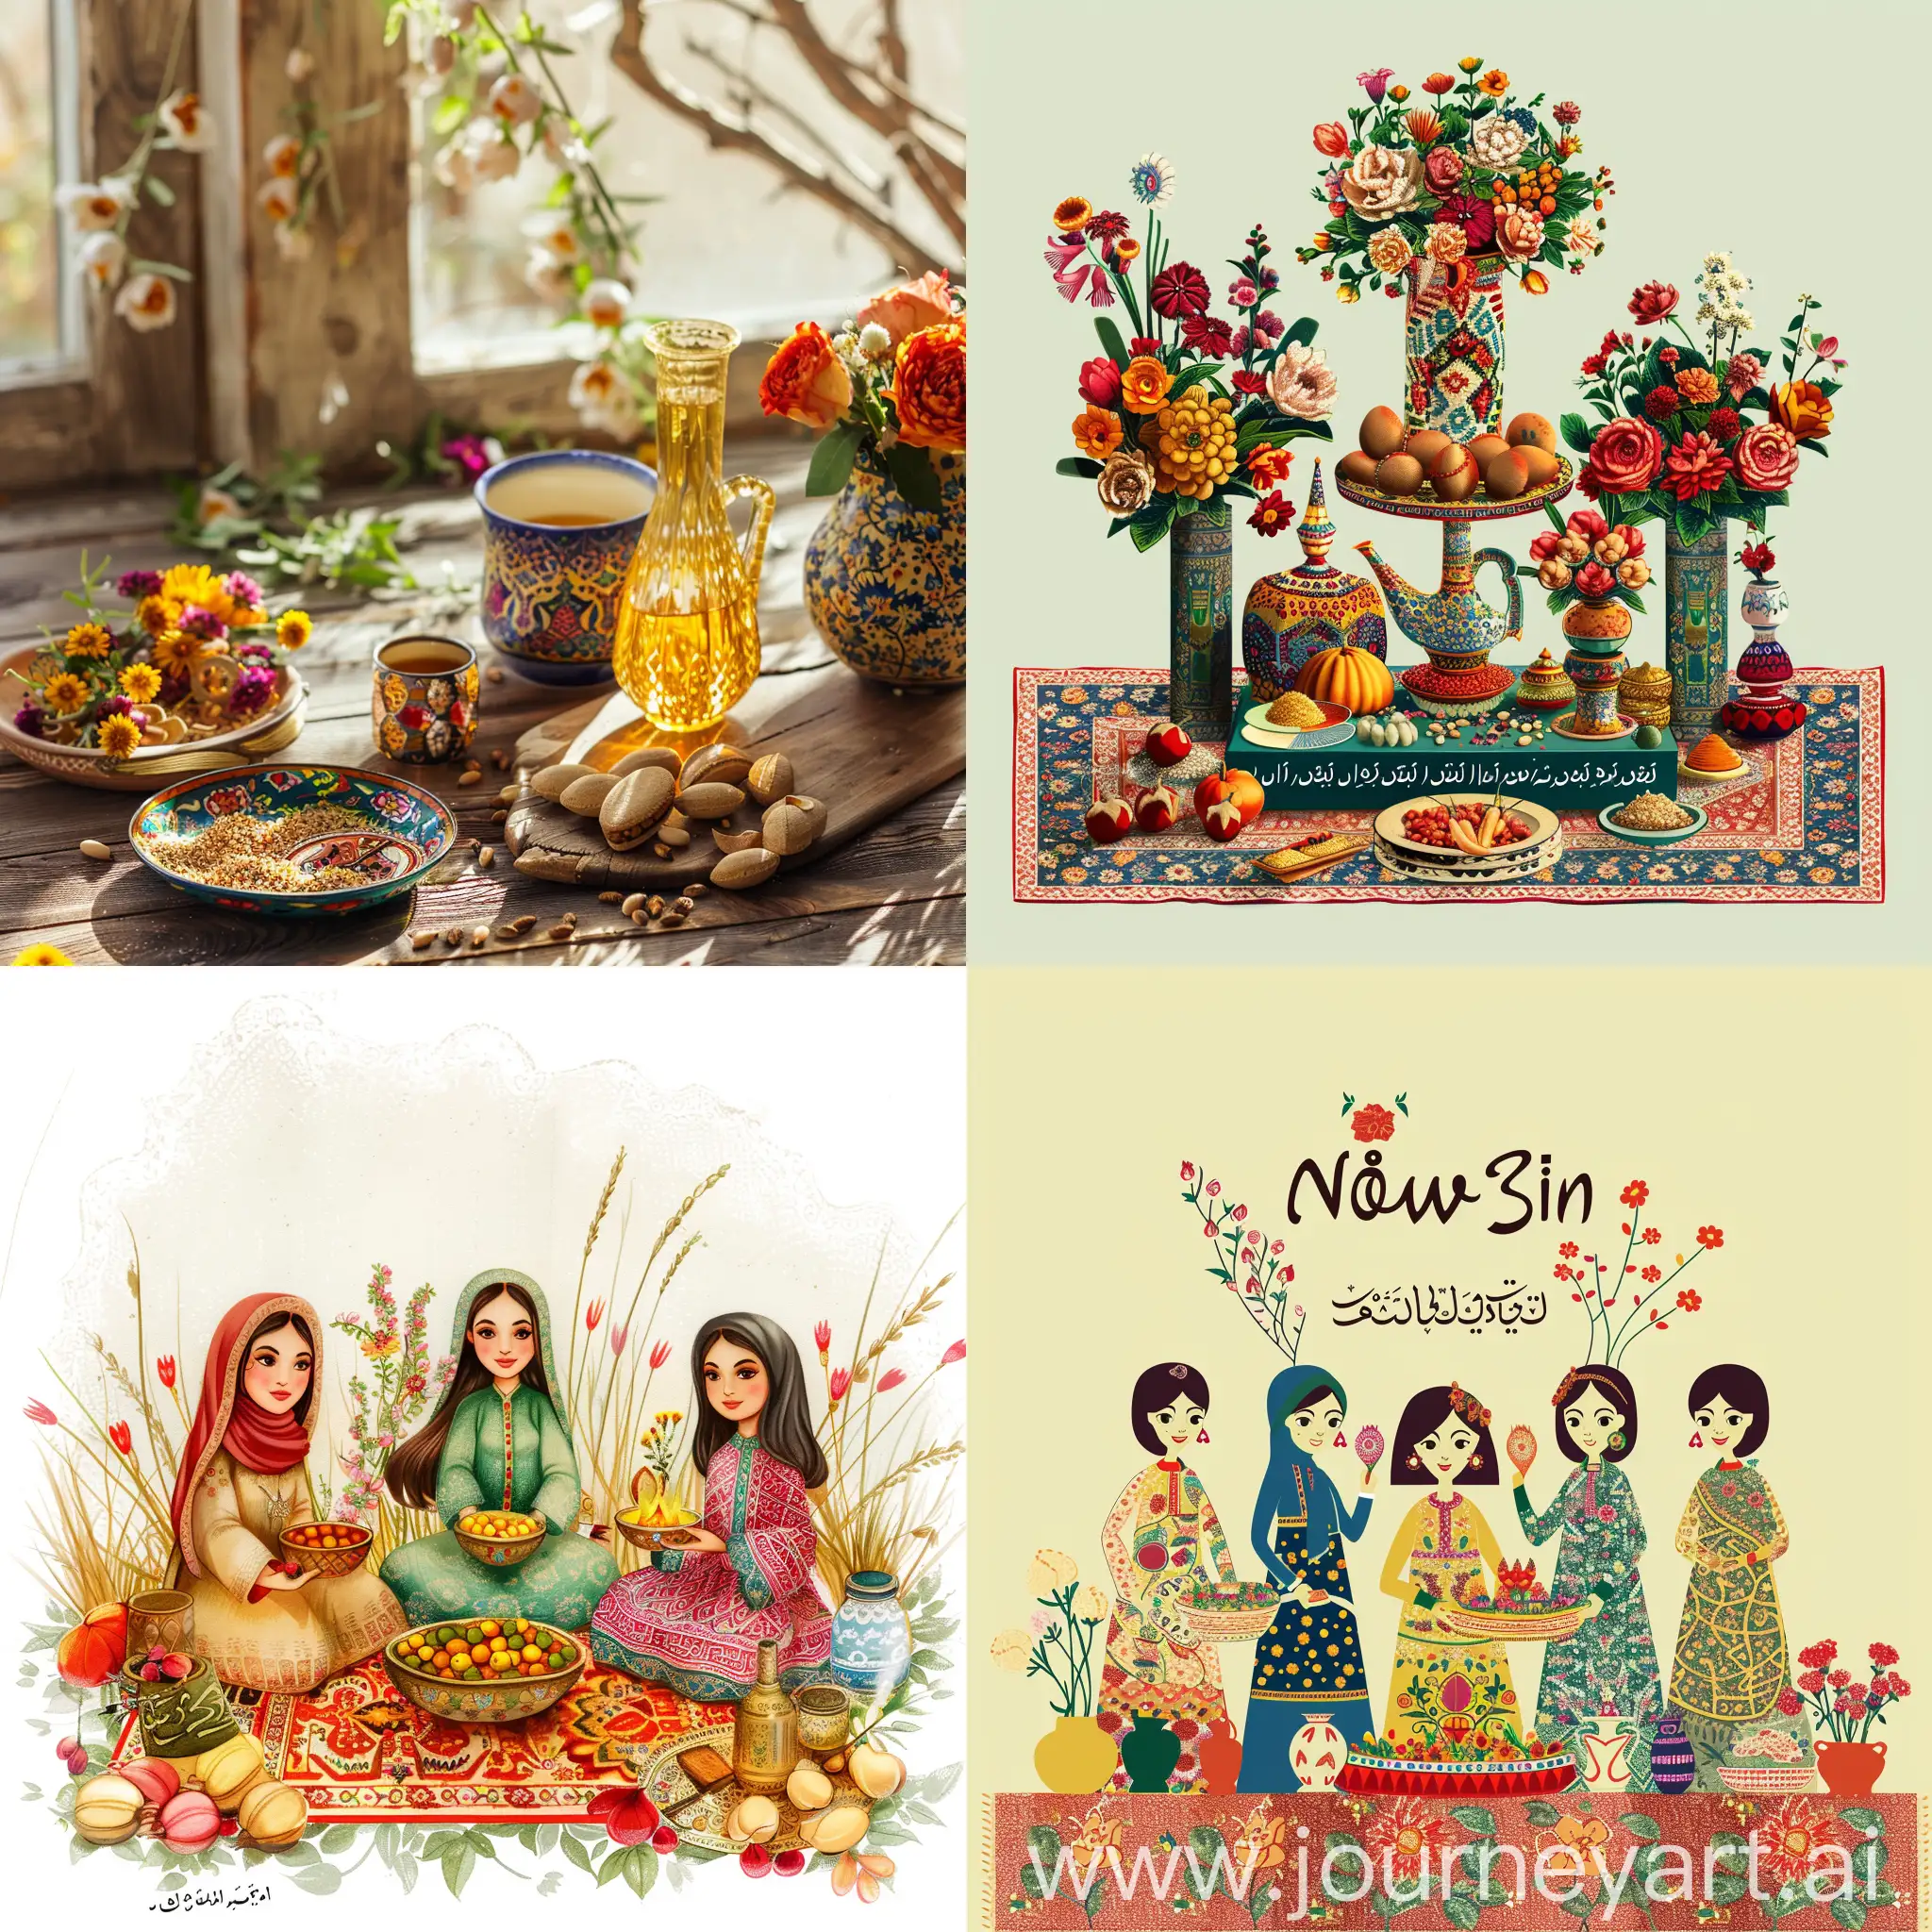 Nowruz-Celebration-with-Traditional-Persian-Patterns-and-Haftsin-Elements